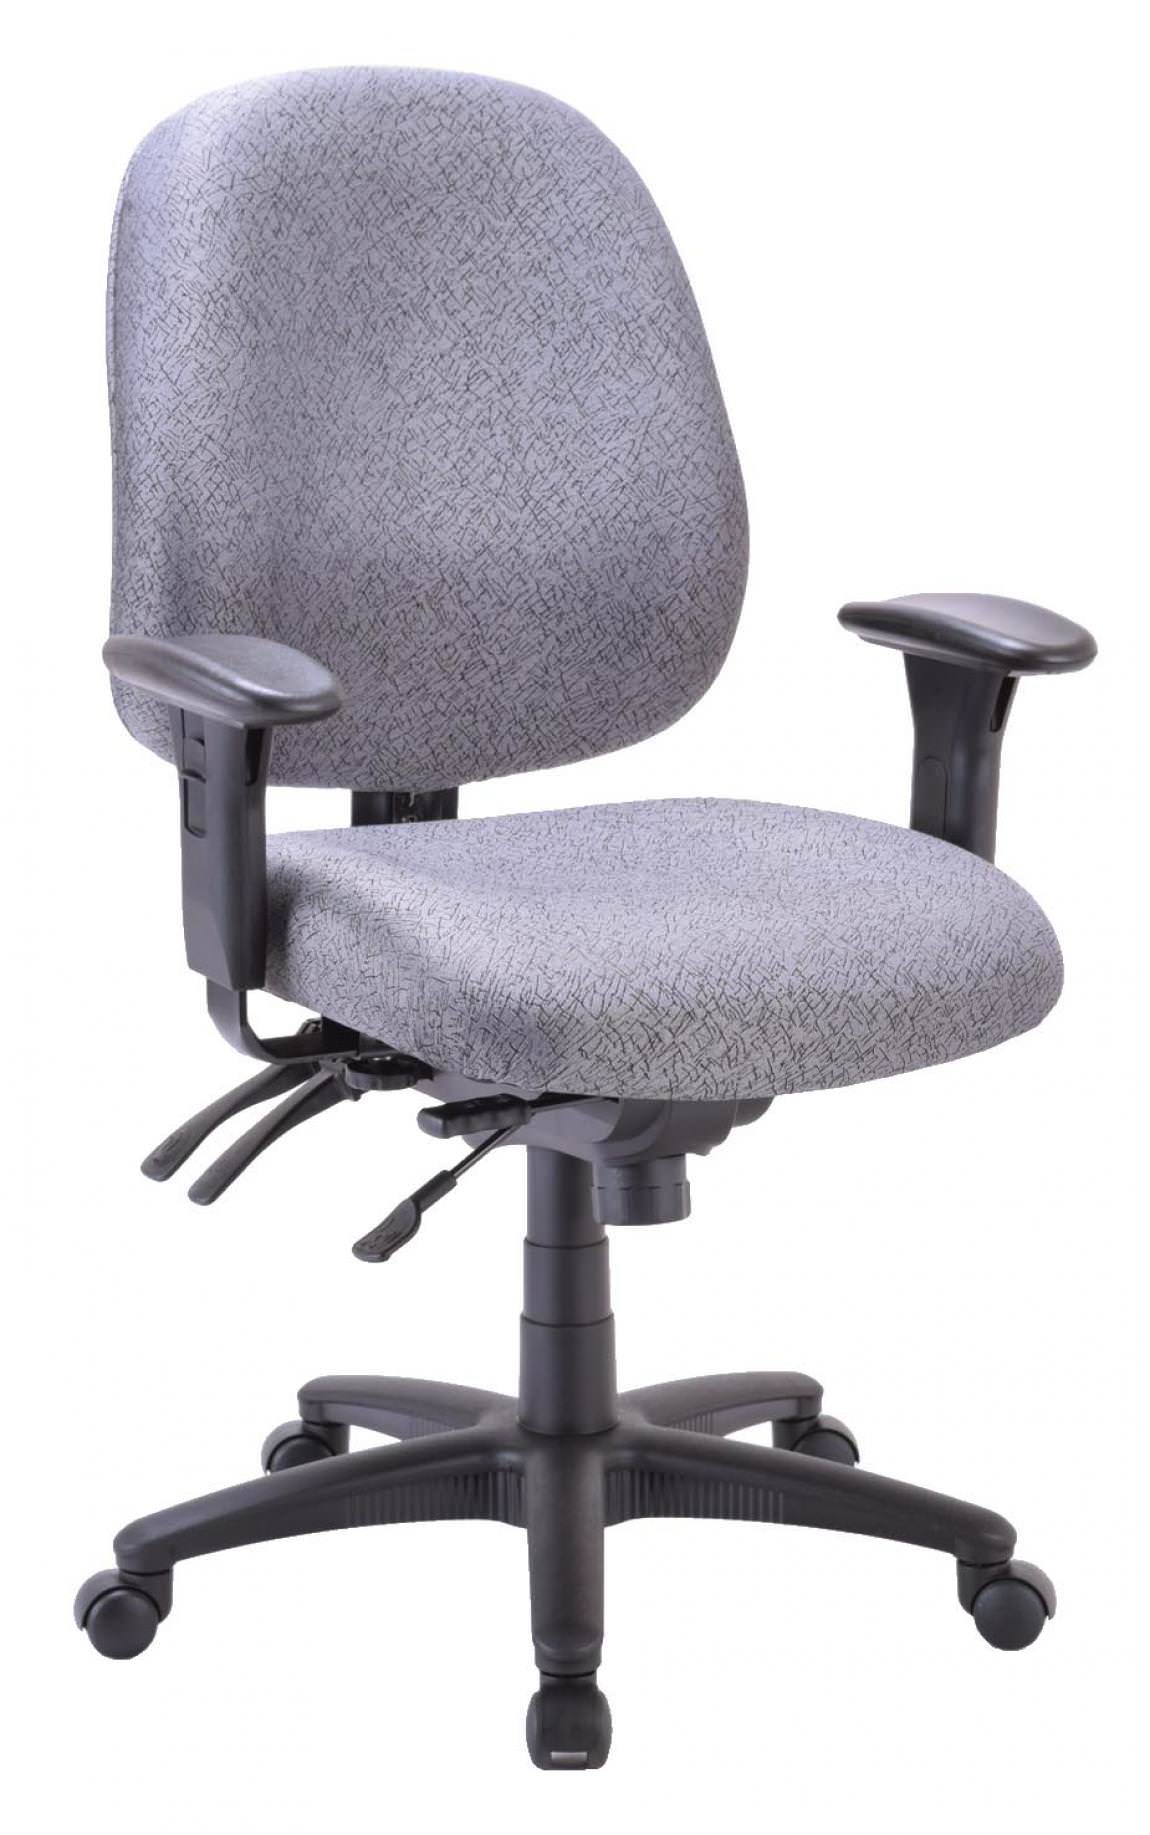 Value Plus Highly Adjustable Mid-Back Chair with Arms